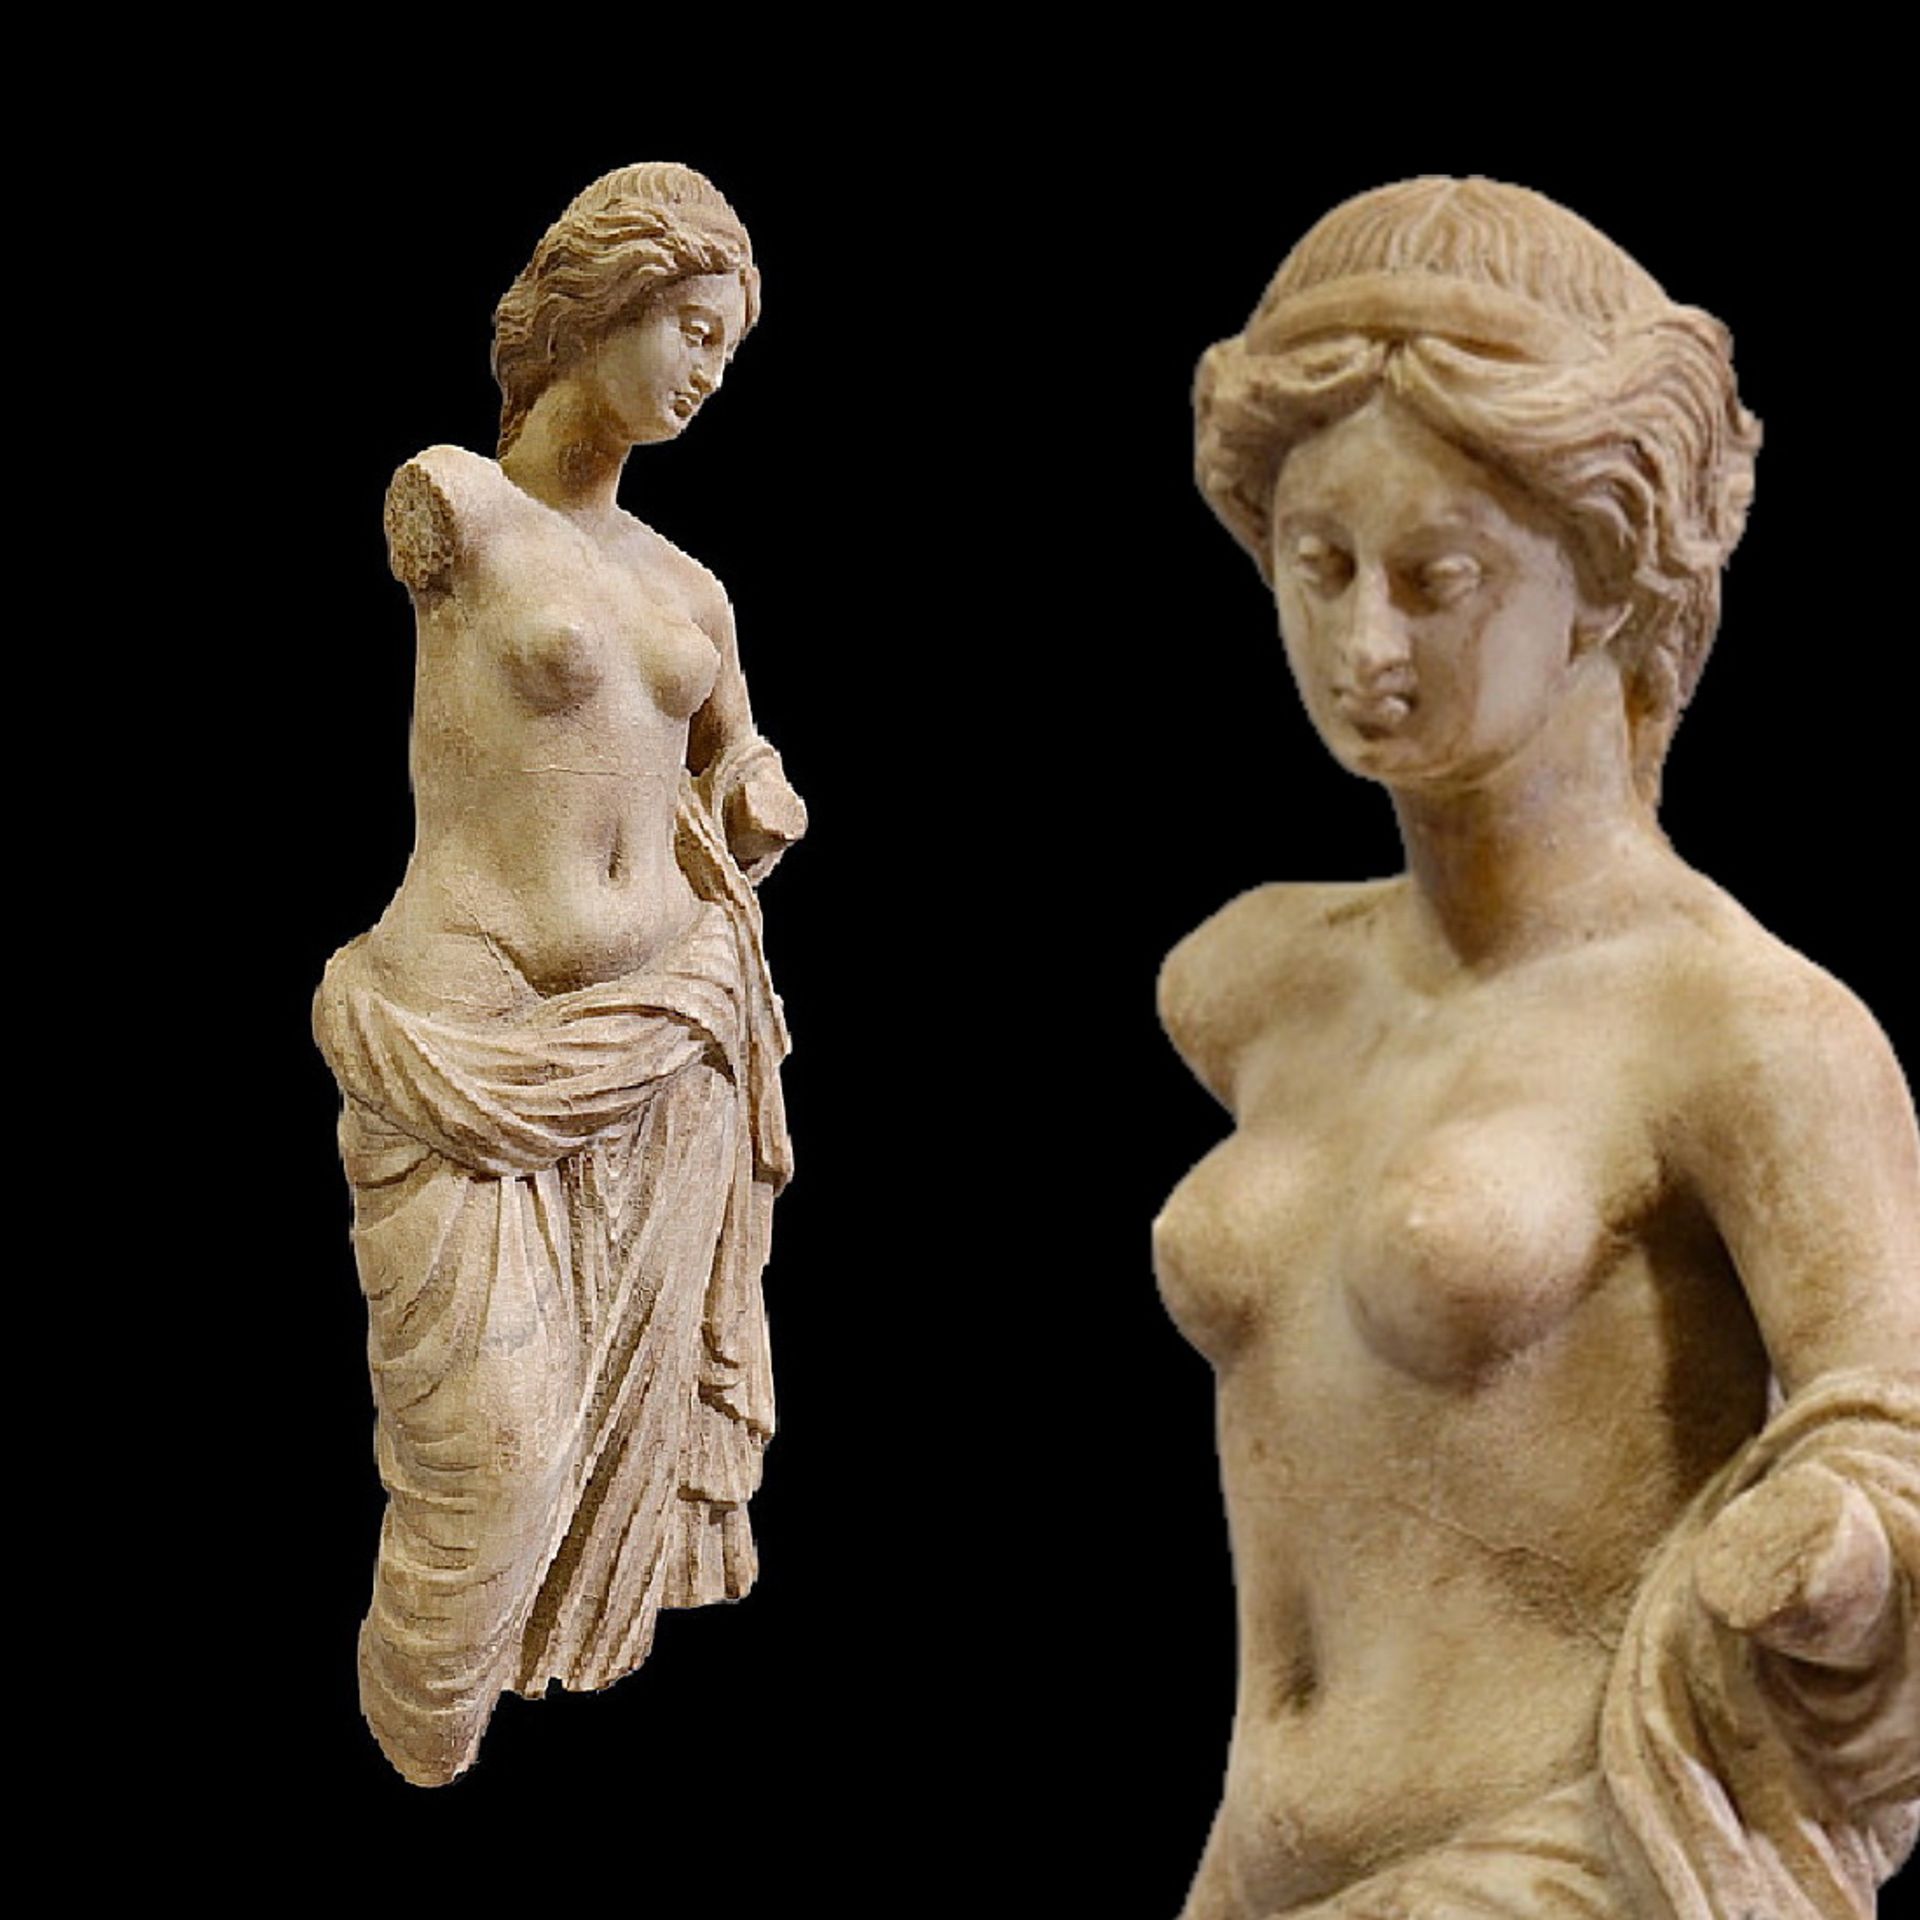 MARBLE STATUE OF VENUS ANCIENT GREECE, 3rd-5th CENTURY BC .